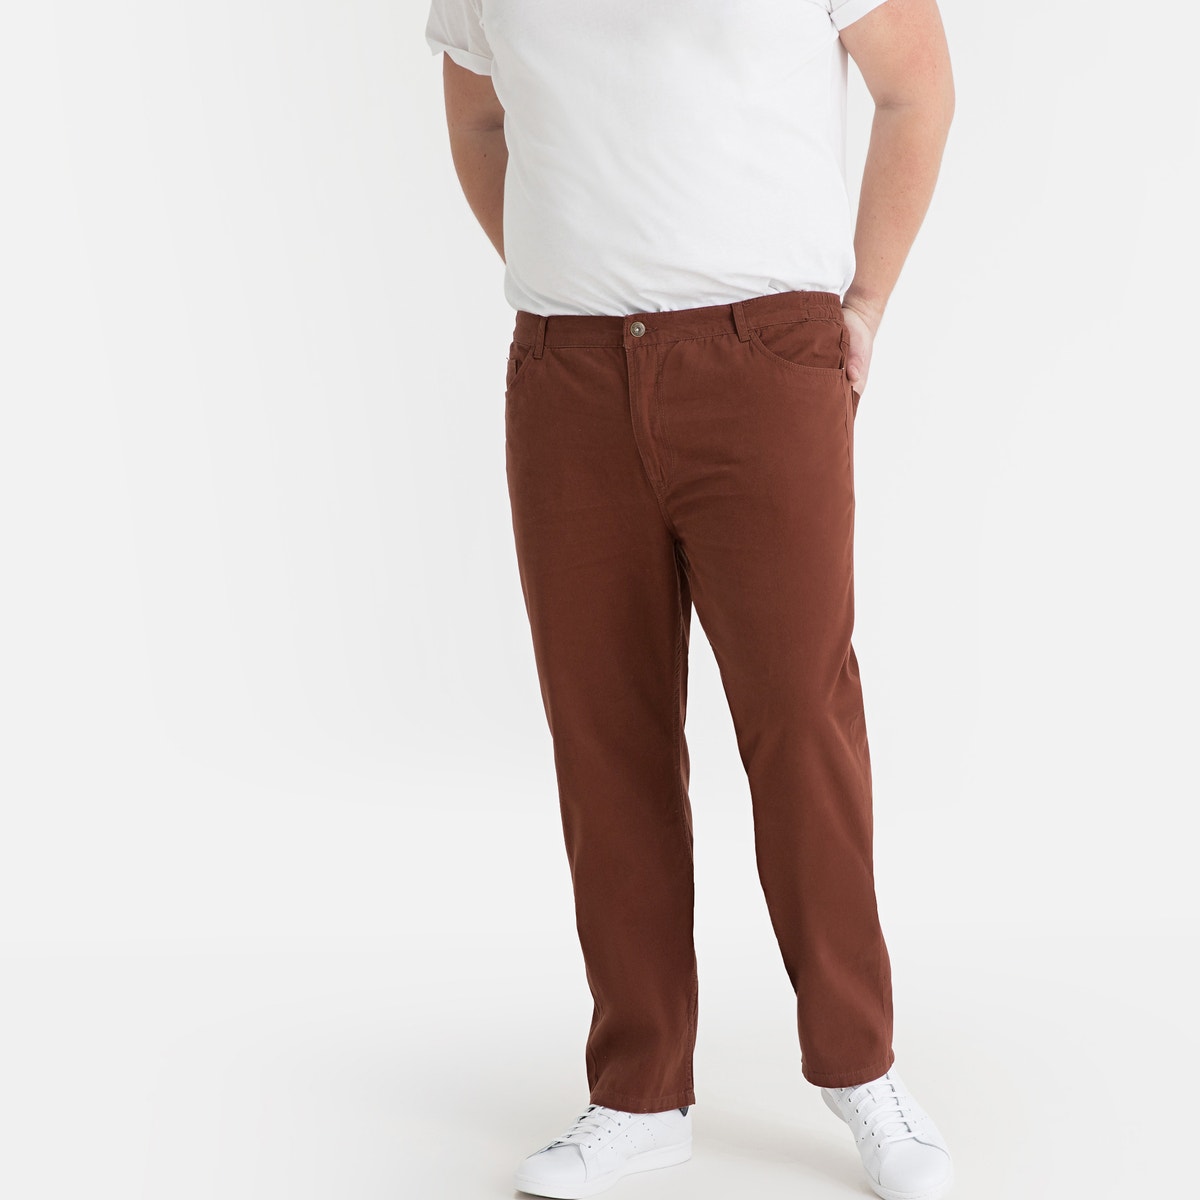 LA REDOUTE COLLECTIONS PLUS Παντελόνι chino ίσια γραμμή